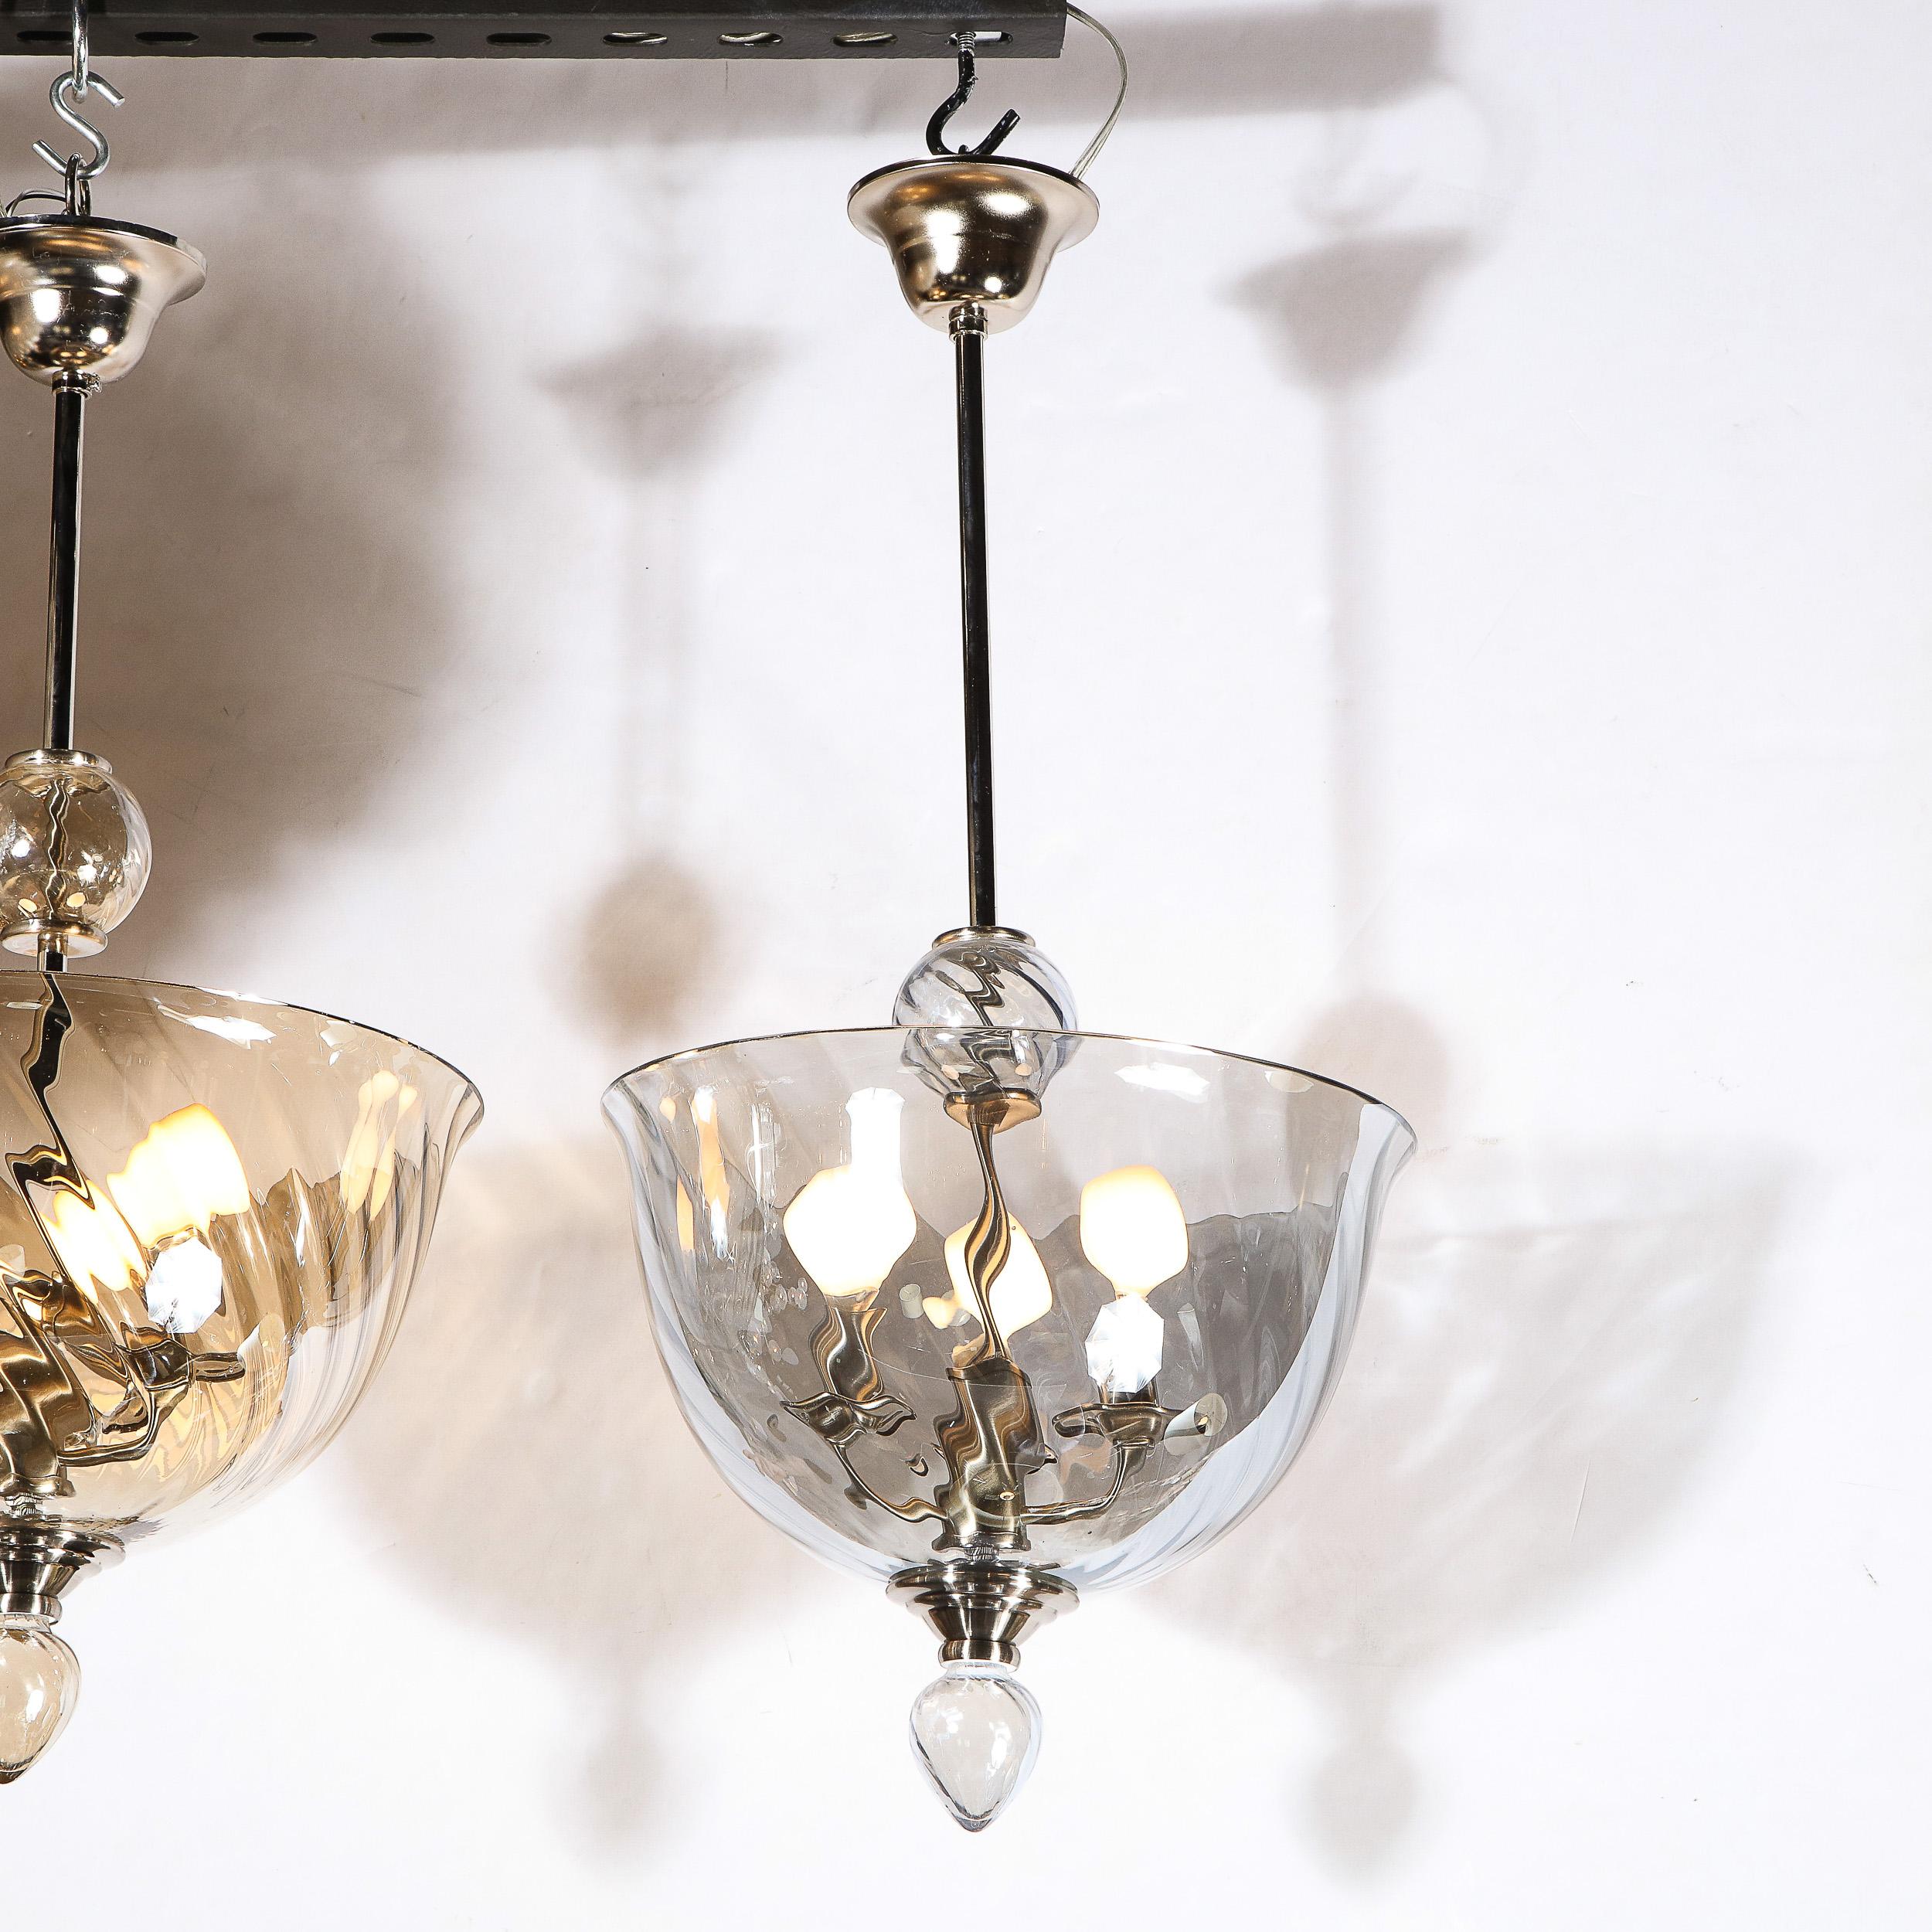 An Italian Mid-Century Modernist handblown Murano glass reverse-dome swirled detail glass chandelier. Nickel & Chrome fittings throughout, as well as a droplet glass finial detail complete the piece. The Chrome fitting can be adjusted to suit